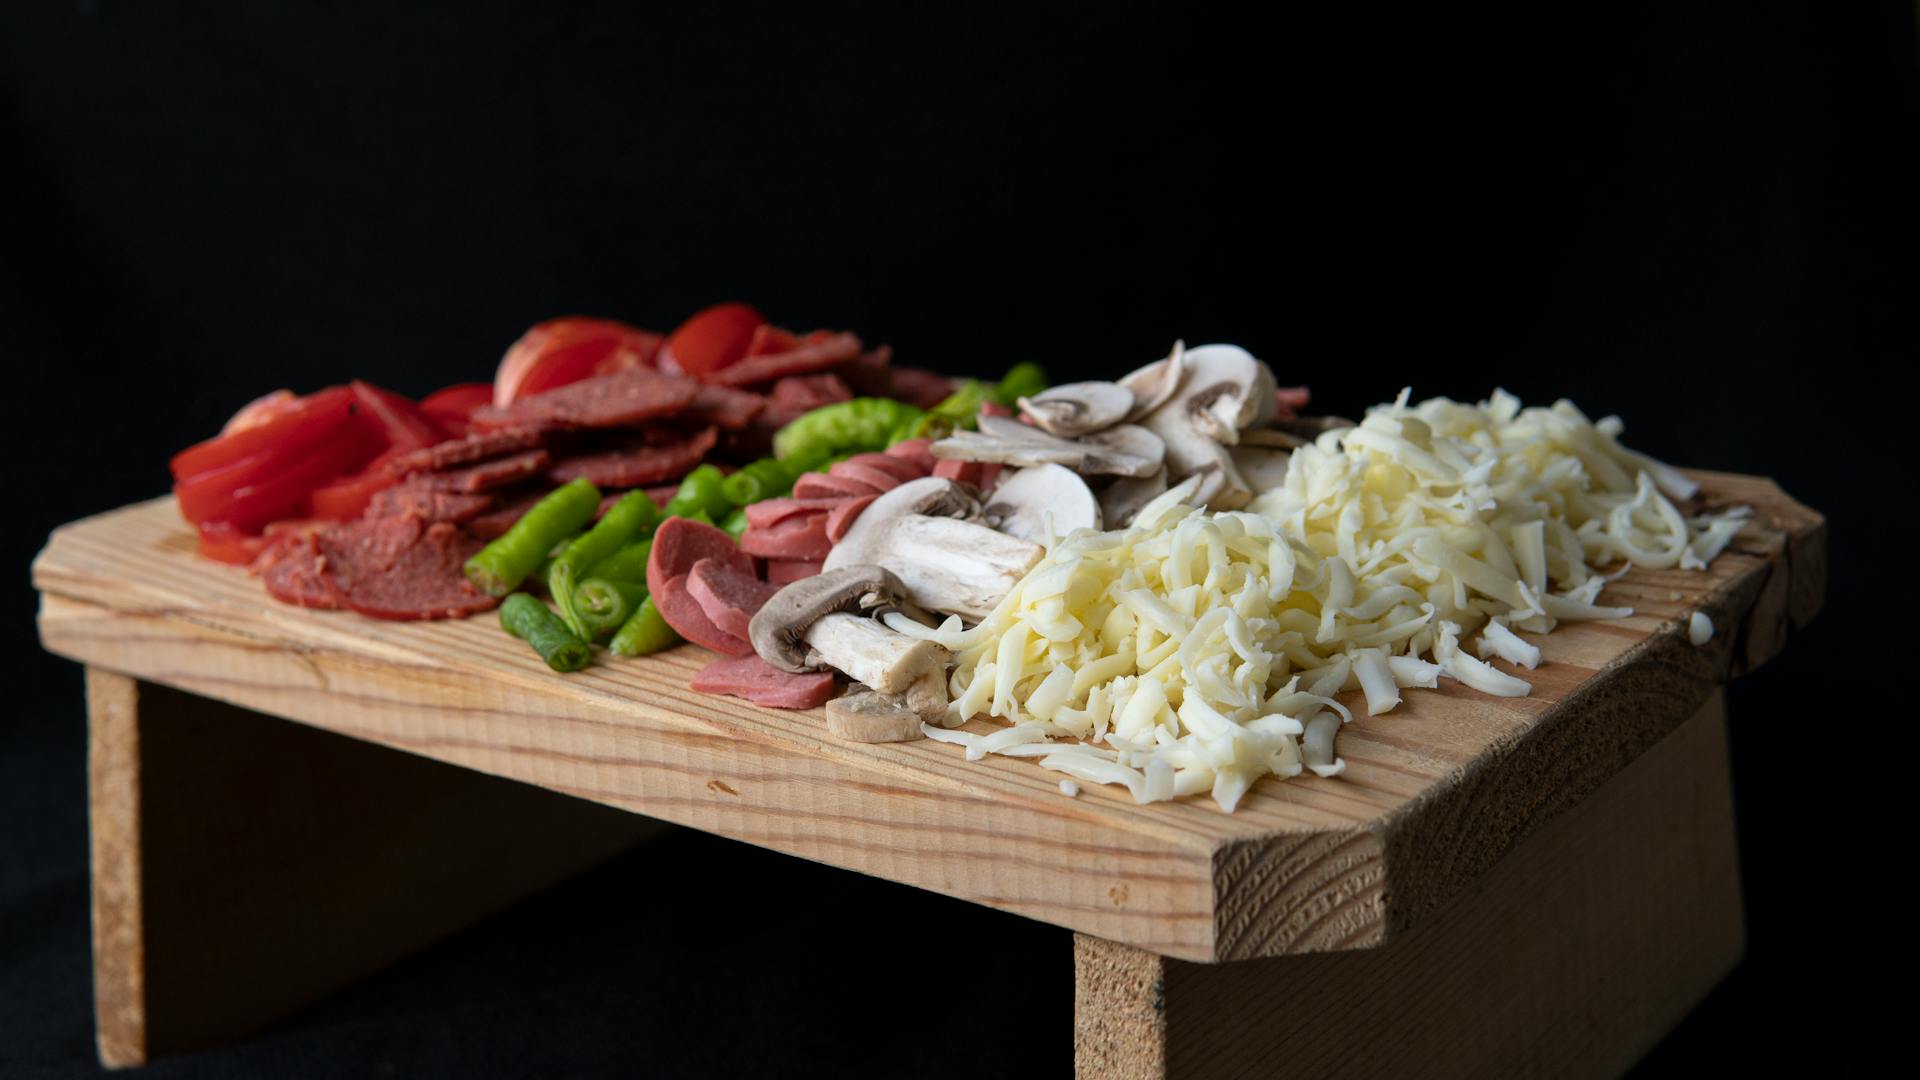 Soft focus of sliced tomatoes and hot peppers placed on chopping board with sausages and grated cheese on black background